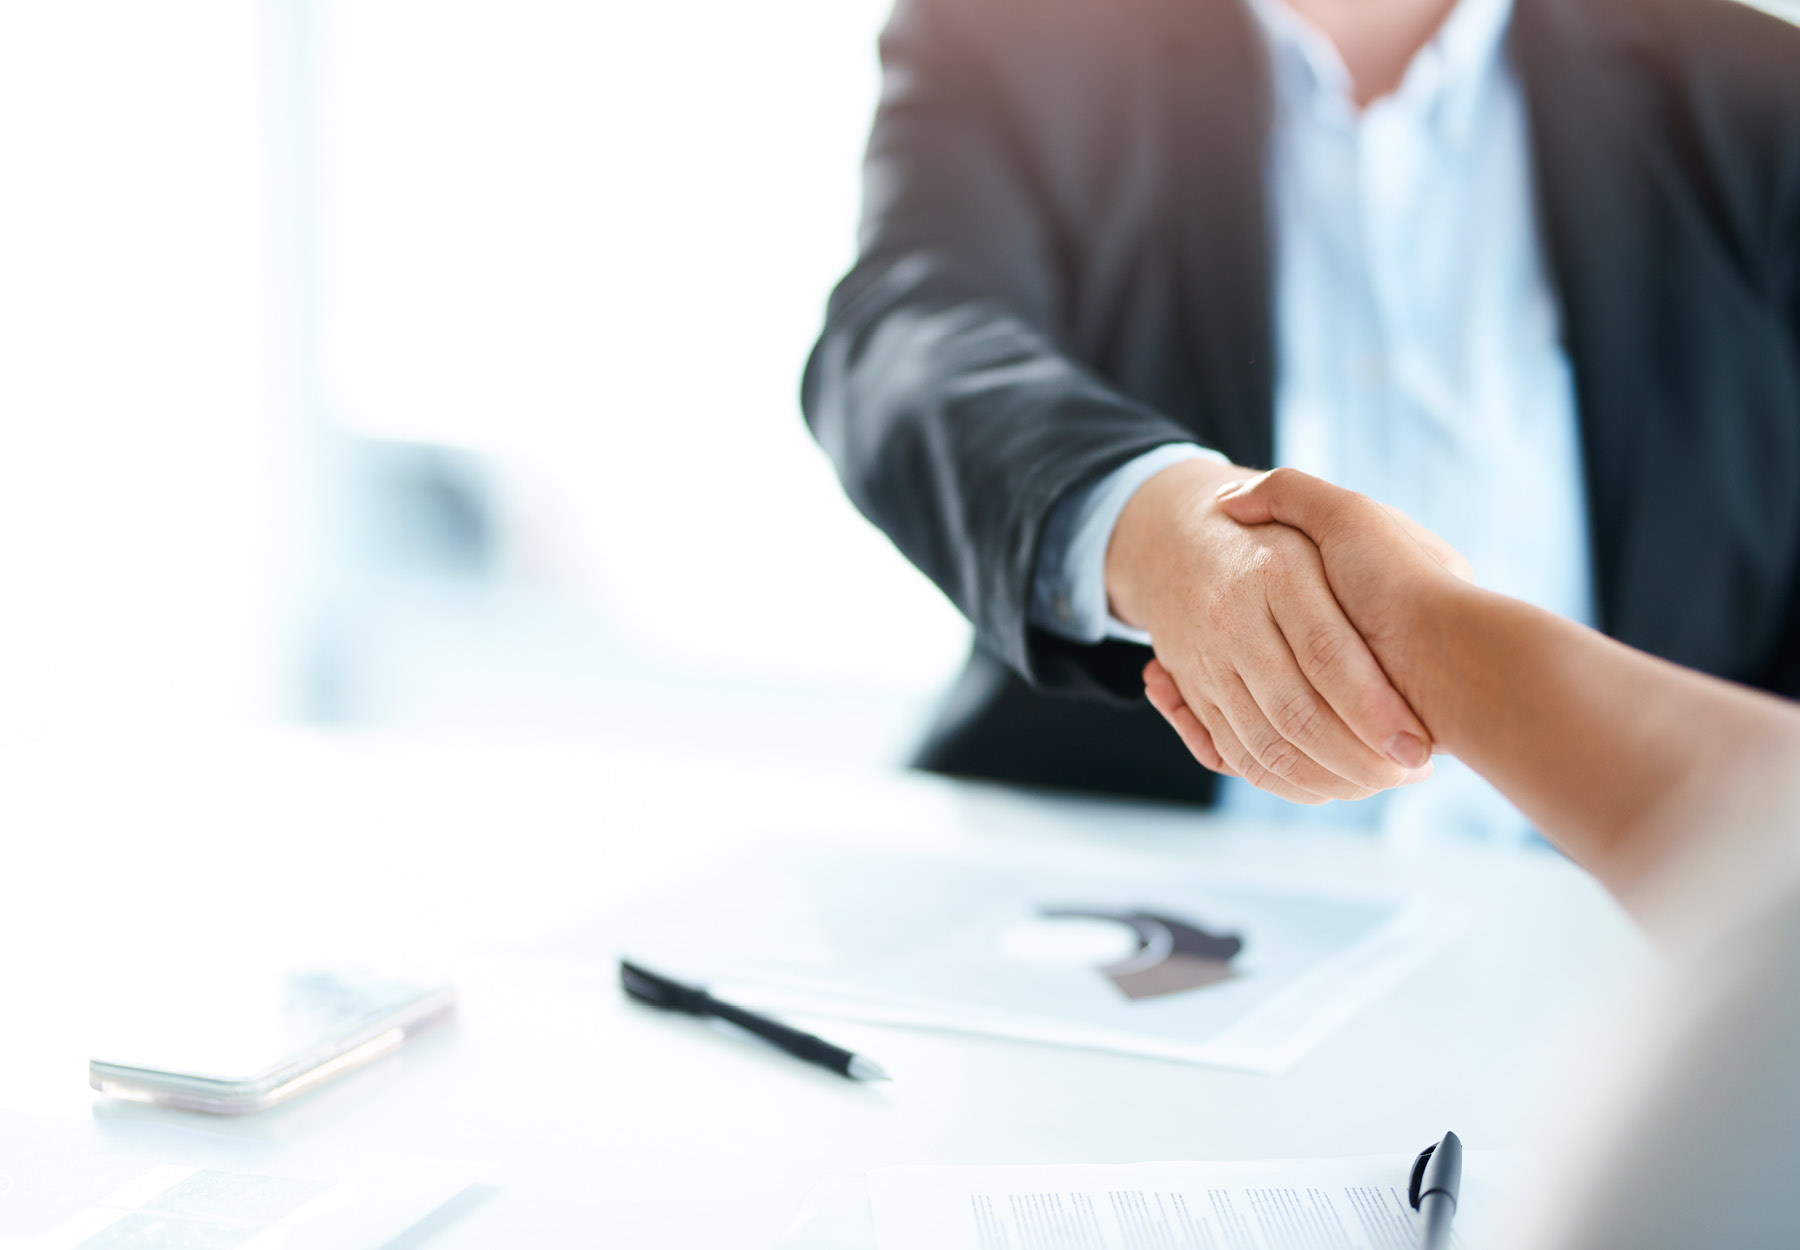 Cropped stock image of two businesswomen shaking hands during a meeting in a modern office